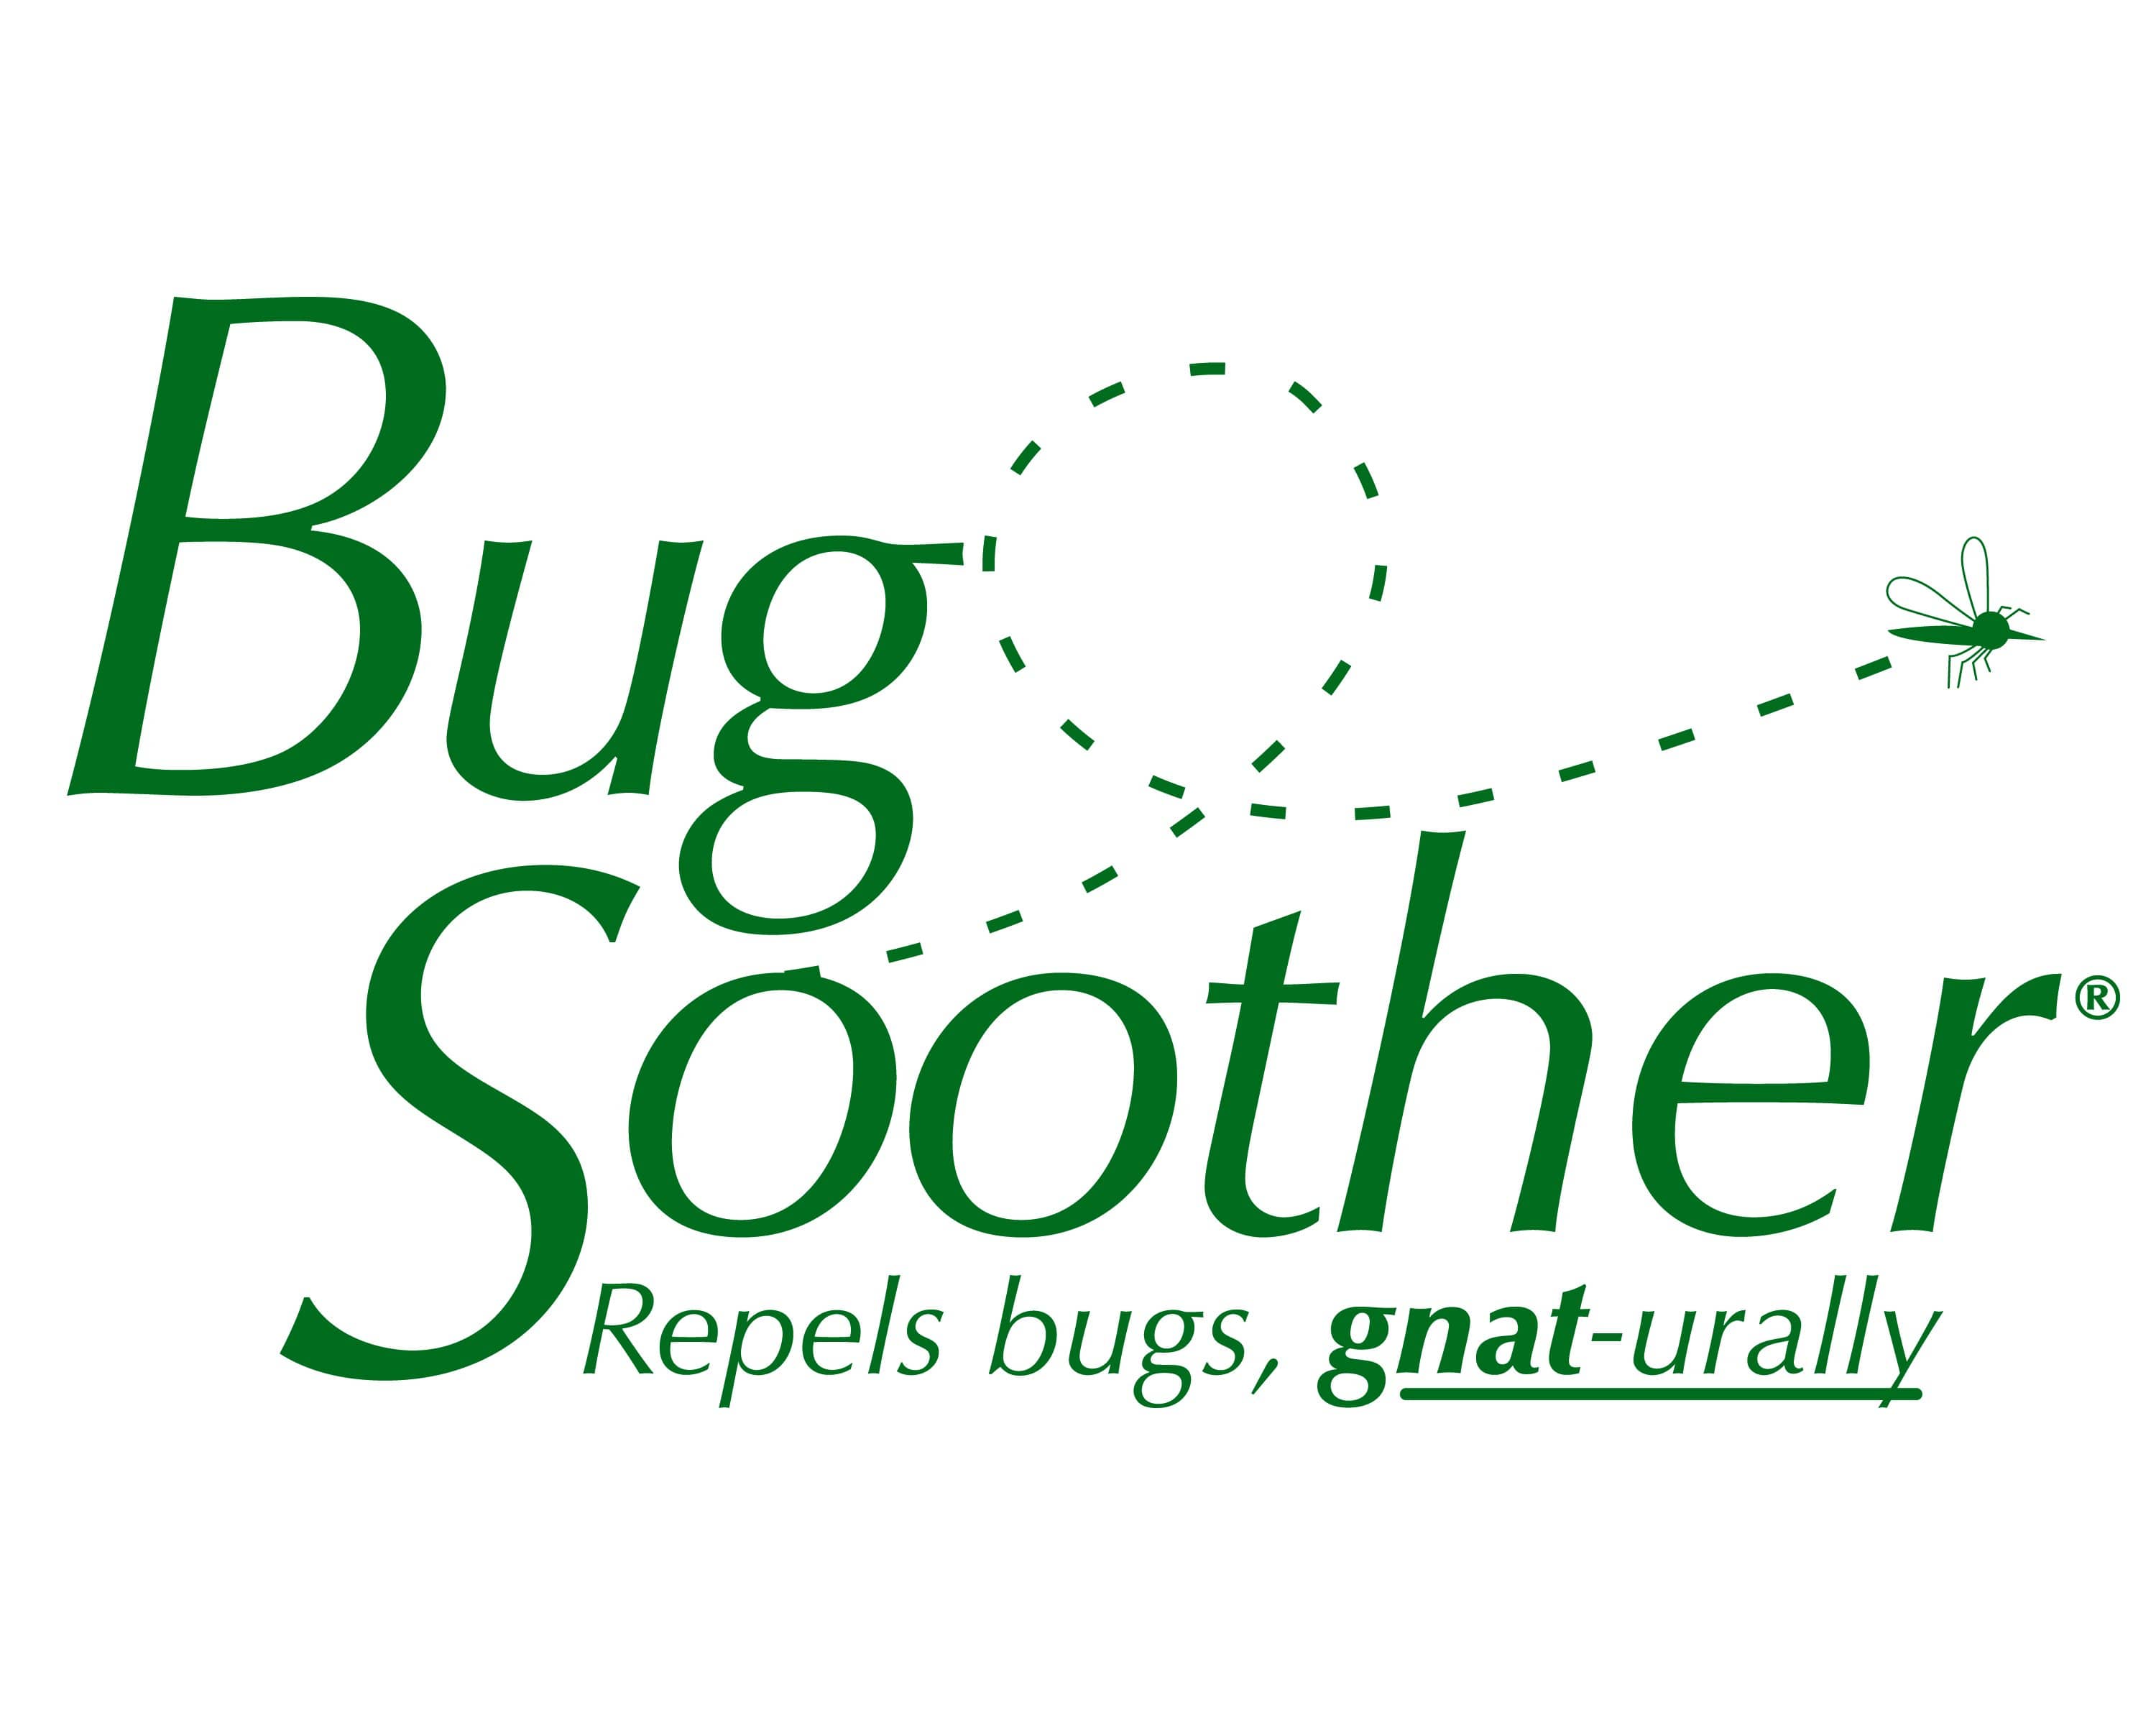 bug-soother-green-txt-_print_-01